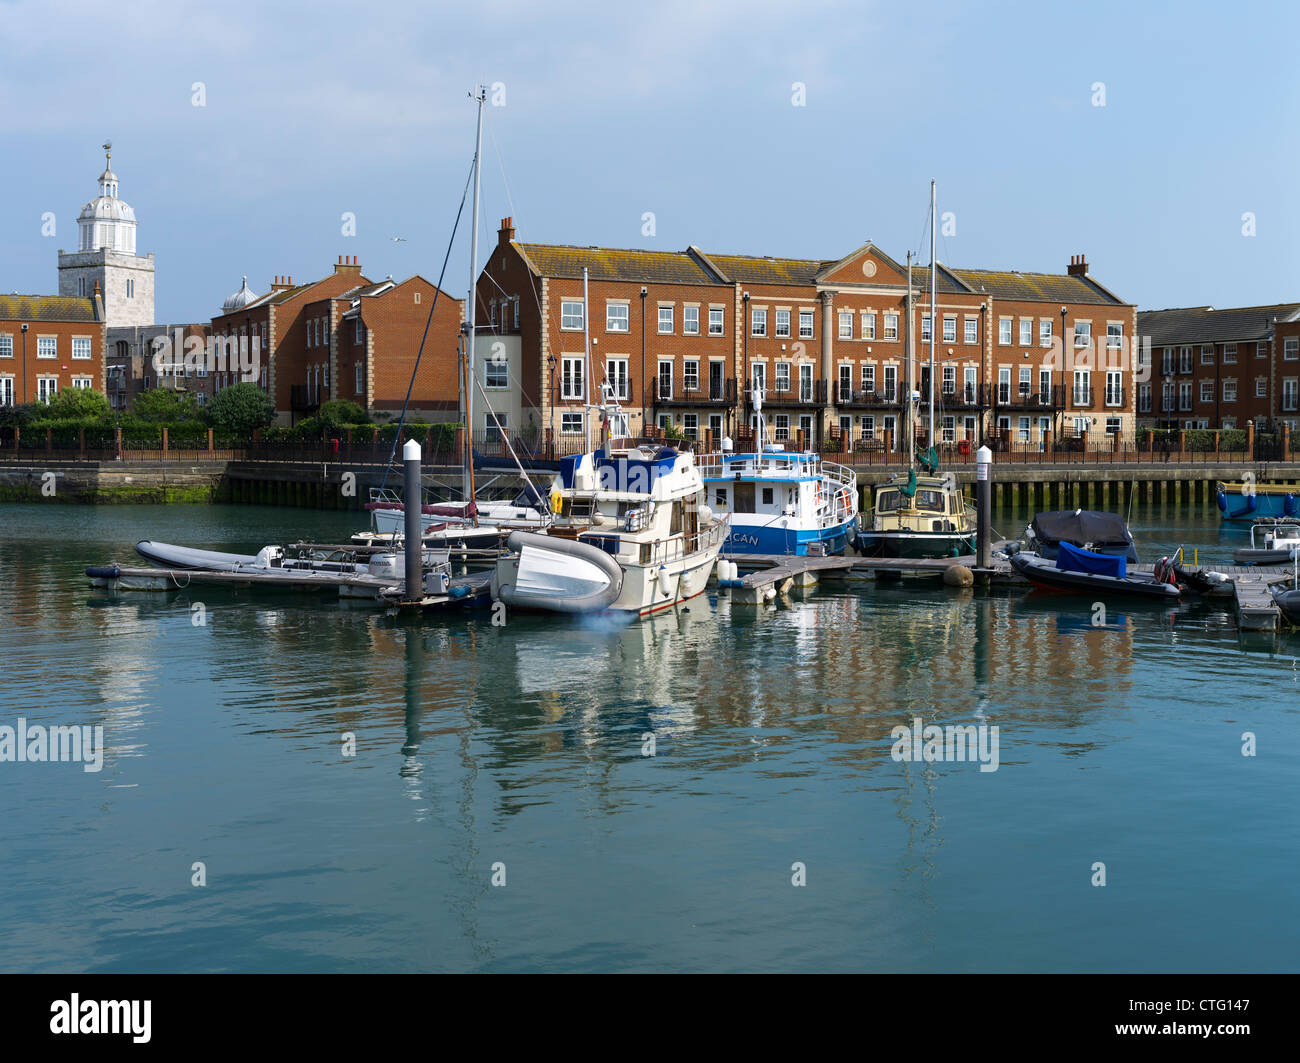 dh Old Portsmouth PORTSMOUTH HAMPSHIRE Modern flats waterfront yachts and boats marina jetties Portsmouth harbour city in uk Stock Photo